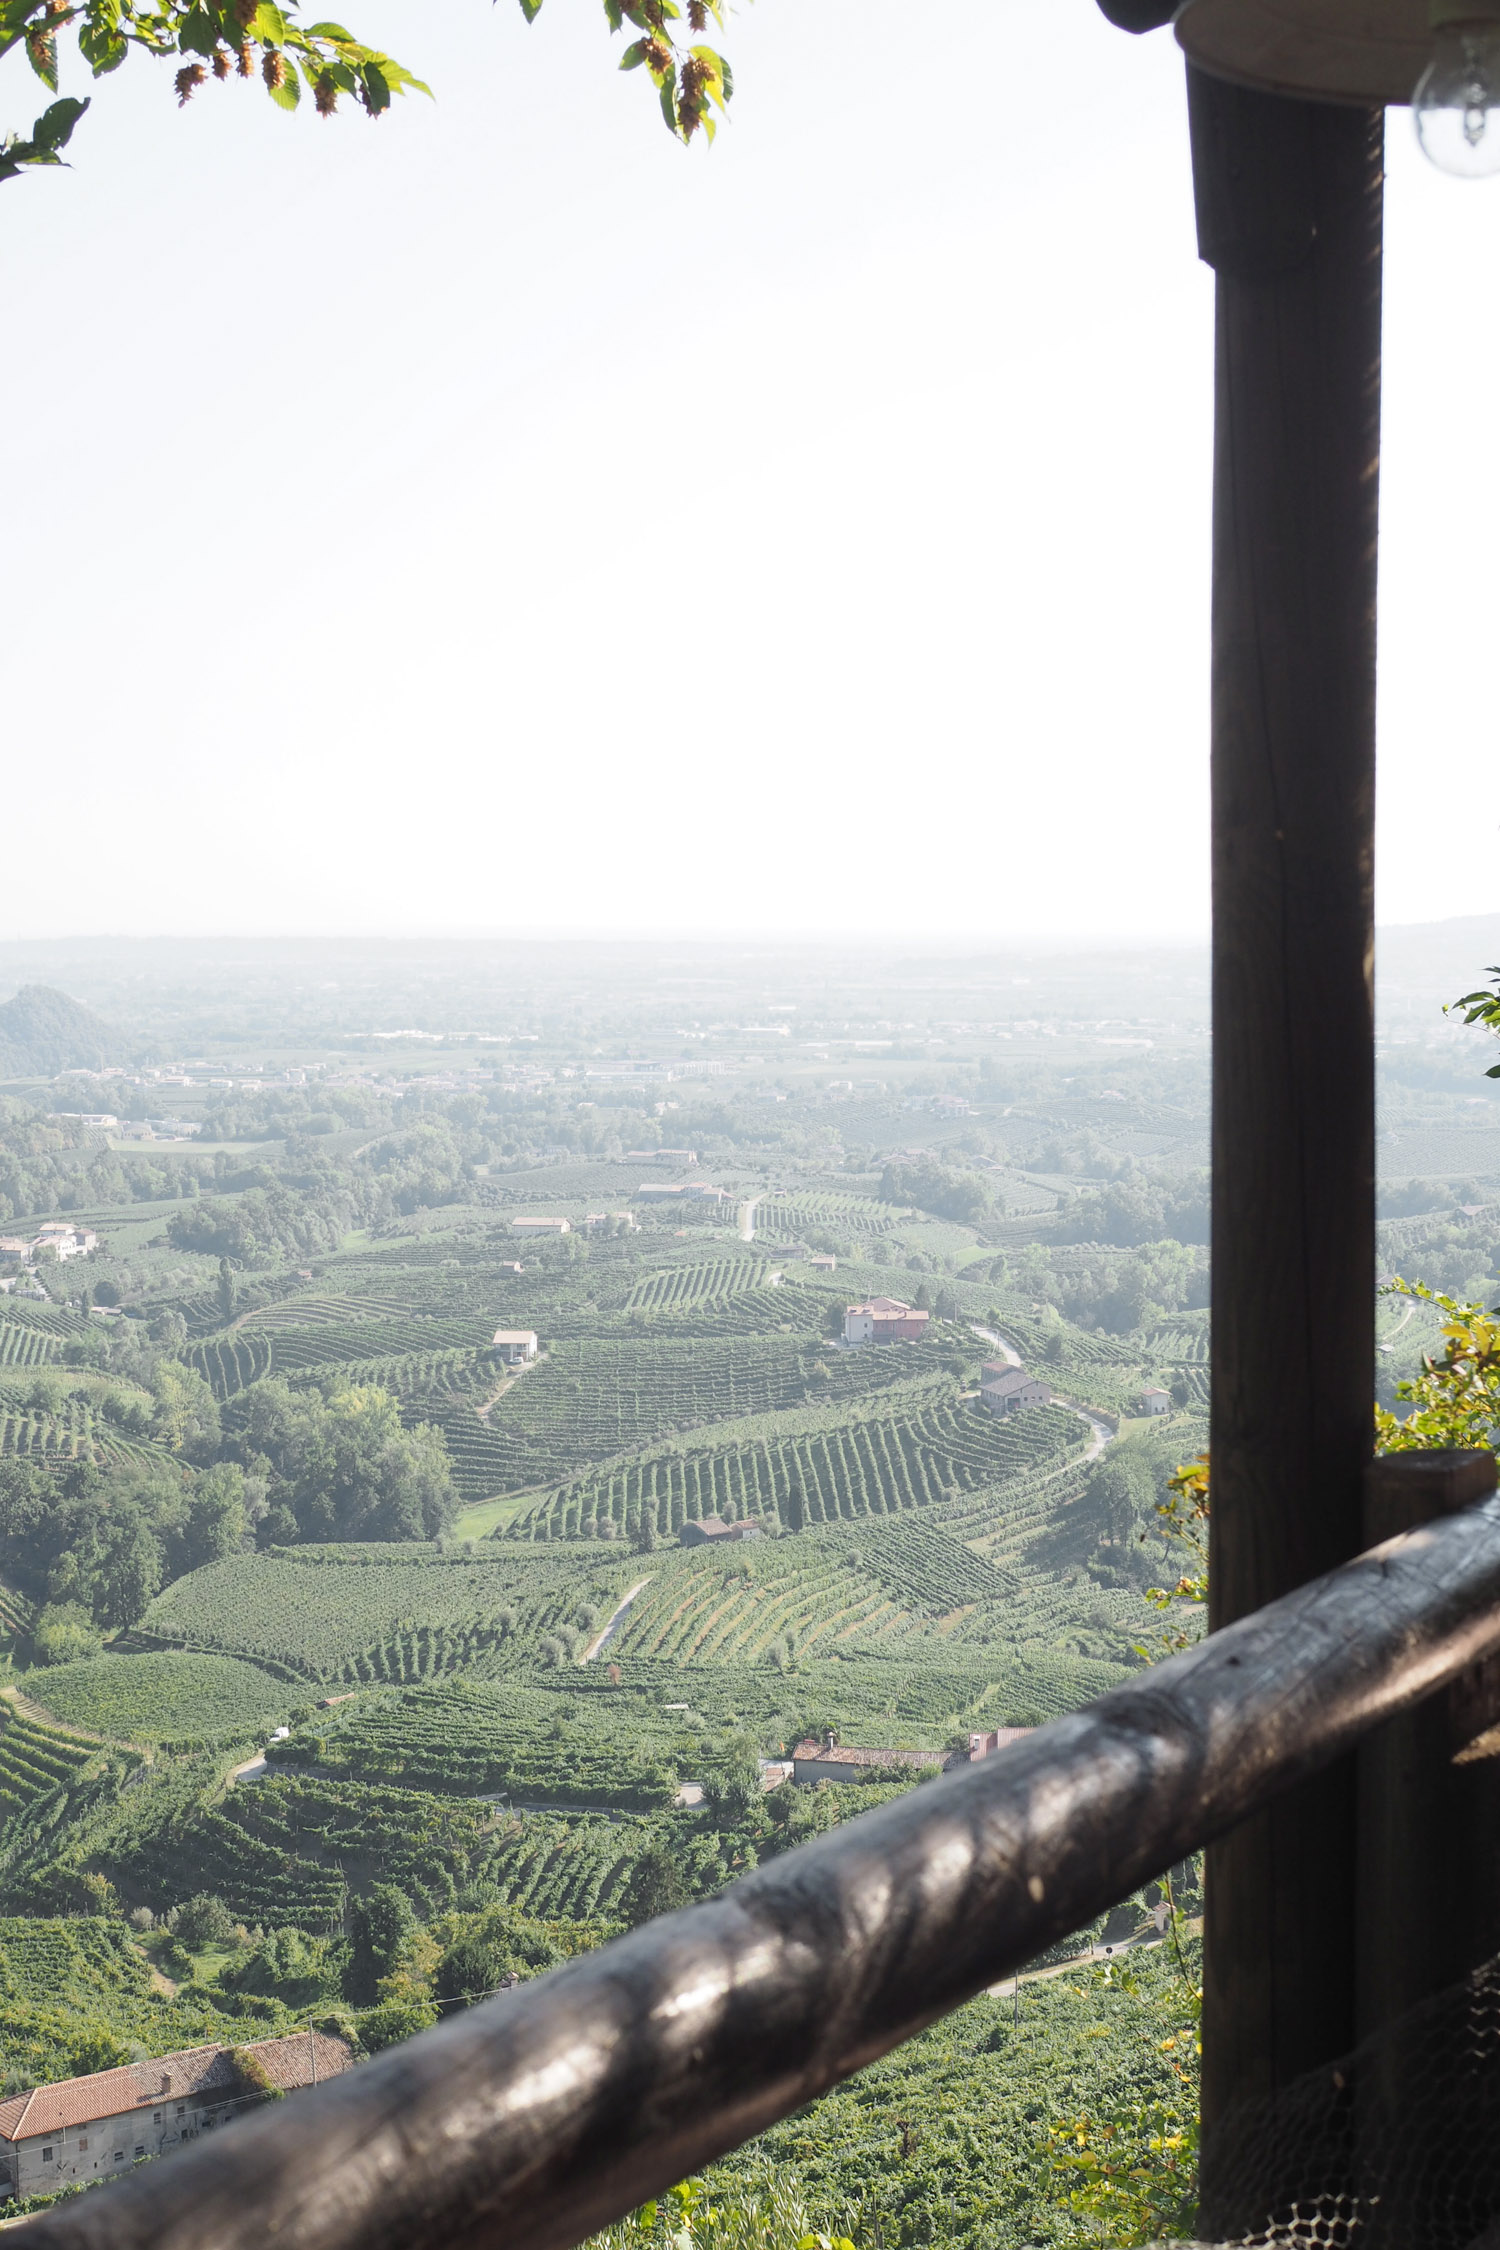 Char and the city - Wine trip to Valdobbiadene in Italy - Mionetto prosecco wineyeards - read more on the blog: //www.idealista.fi/charandthecity/2016/09/14/mionetto-prosecco-valdobbiadene #mionetto #mionettoprosecco #prosecco #wineyeard #winetasting #valdobbiadene #italy